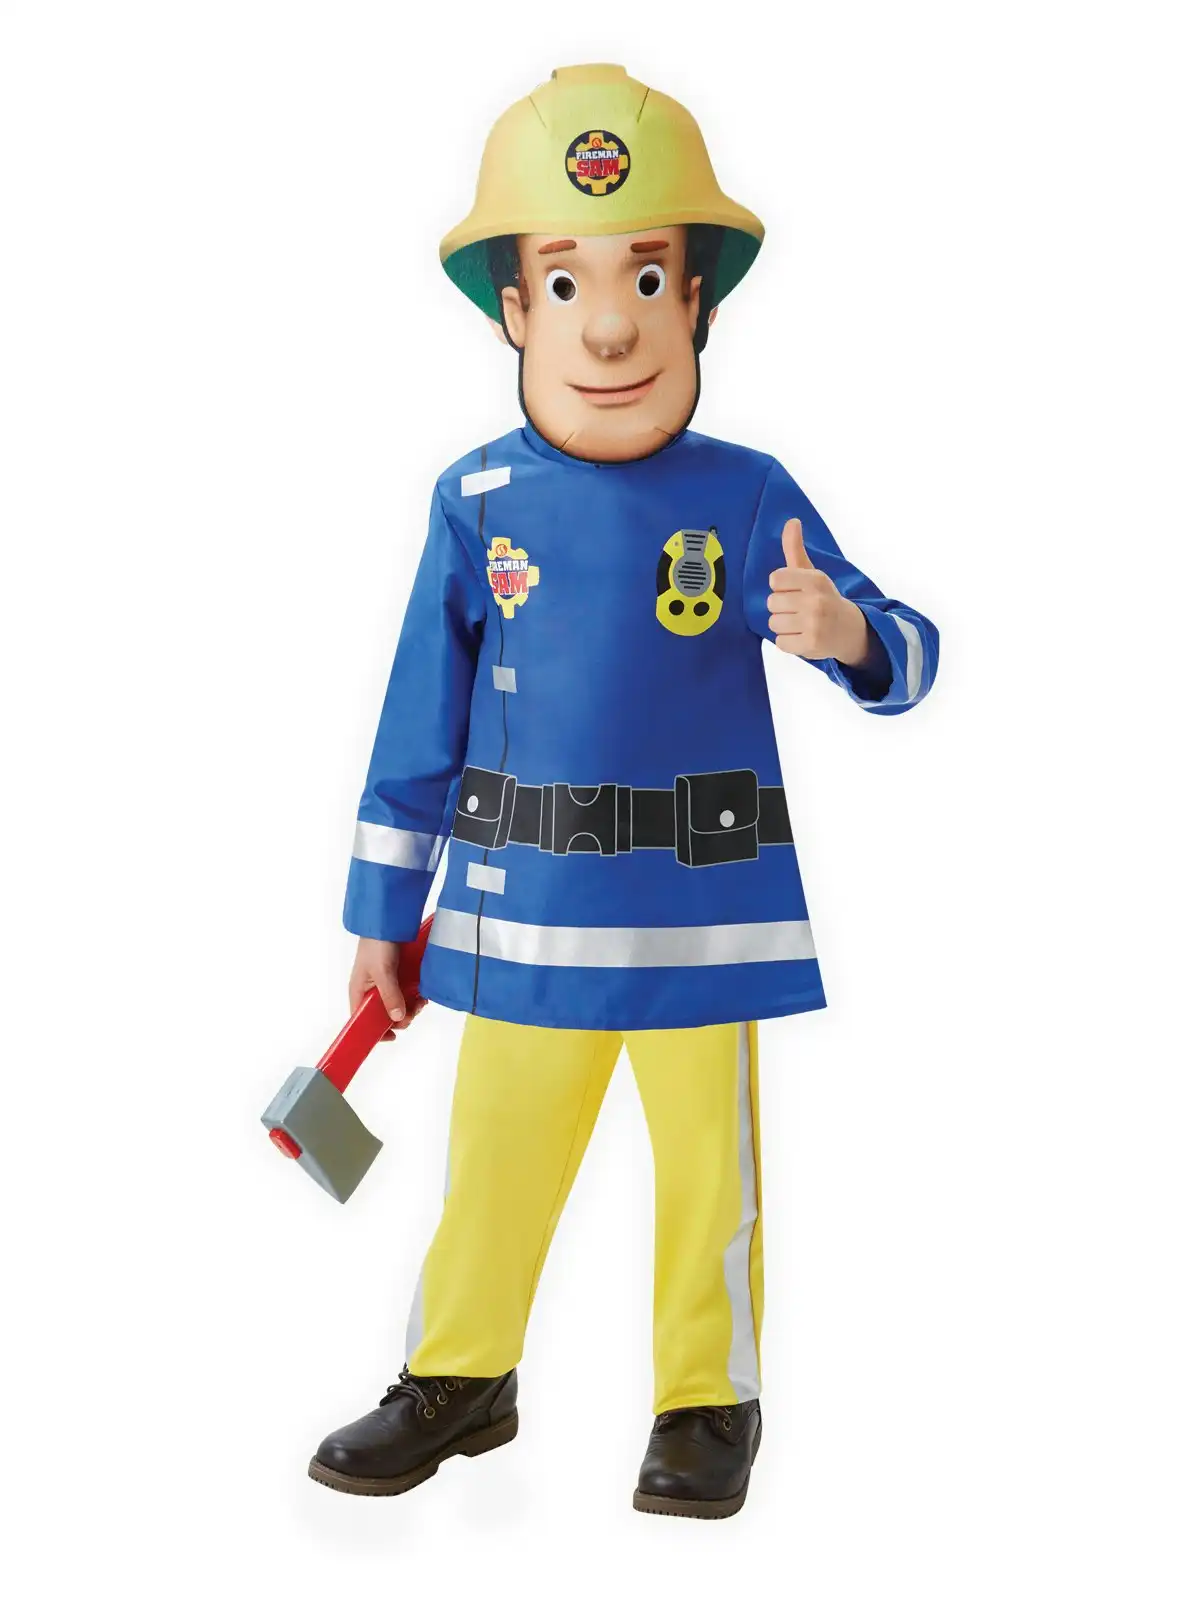 Rubies Fireman Sam Character Deluxe Dress Up Party Costume - Size Toddler/Baby